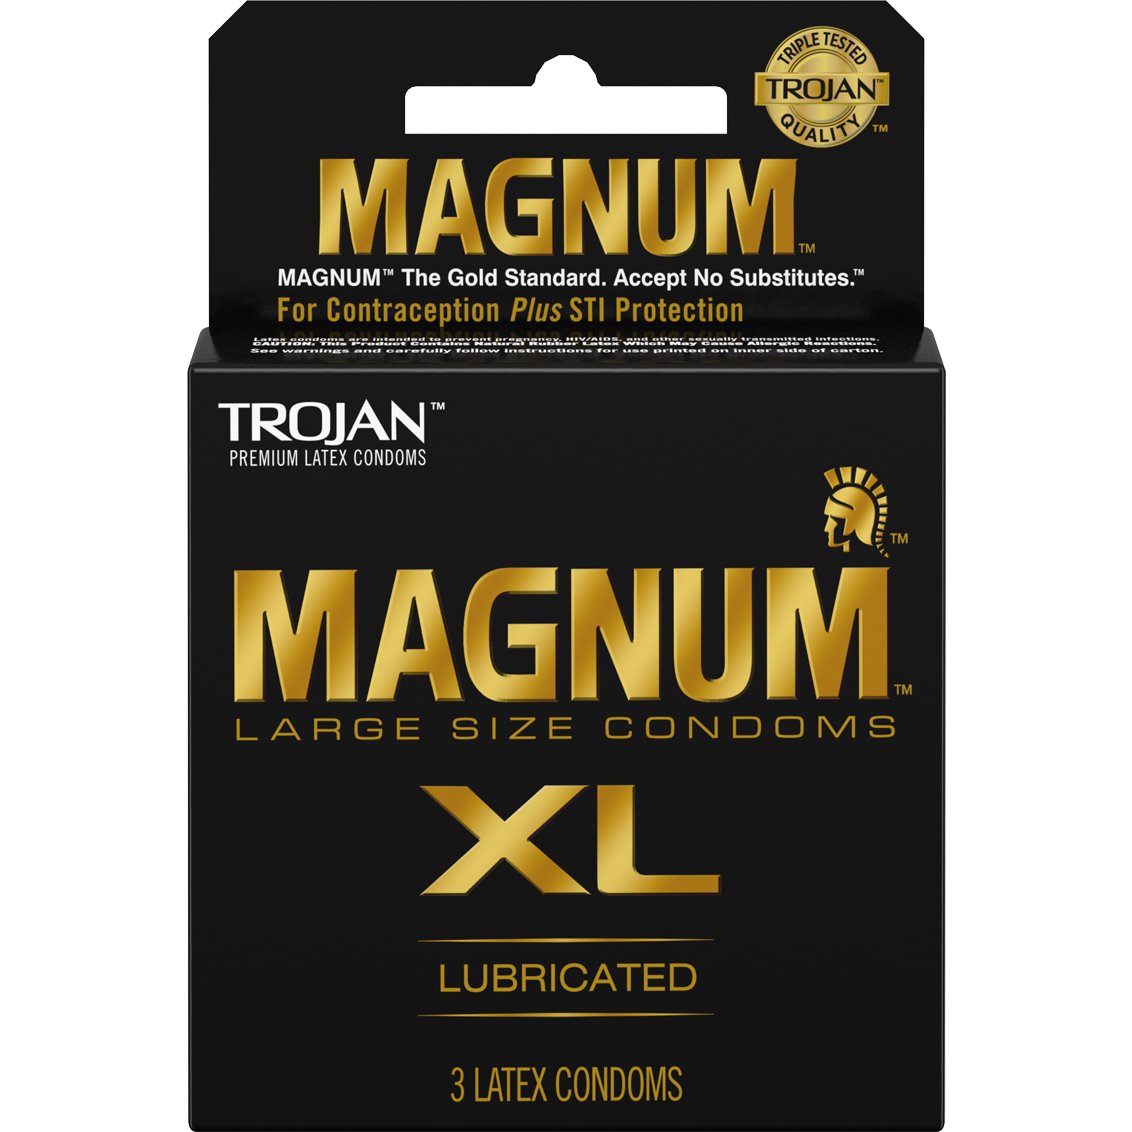 Trojan Magnum XL Lubricated Condoms - 3 Pack & 12 Pack Available!-BestGSpot